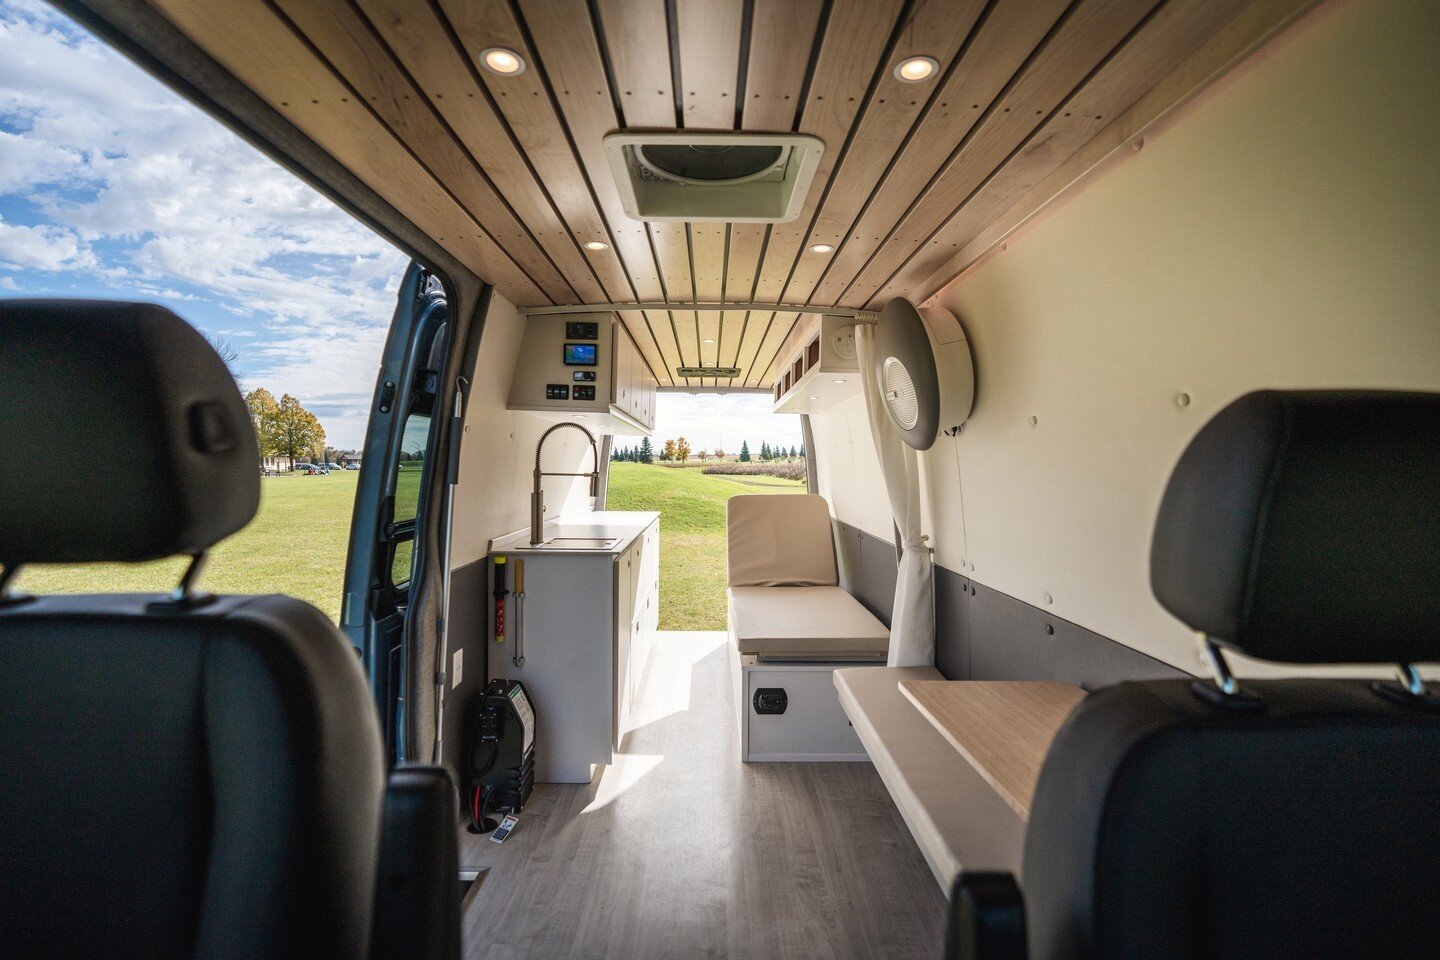 Take a look at the Vanna MMU! A modern doctors office on wheels, helping bring healthcare anywhere. We're excited to see some of the first units rolling out in North Dakota!